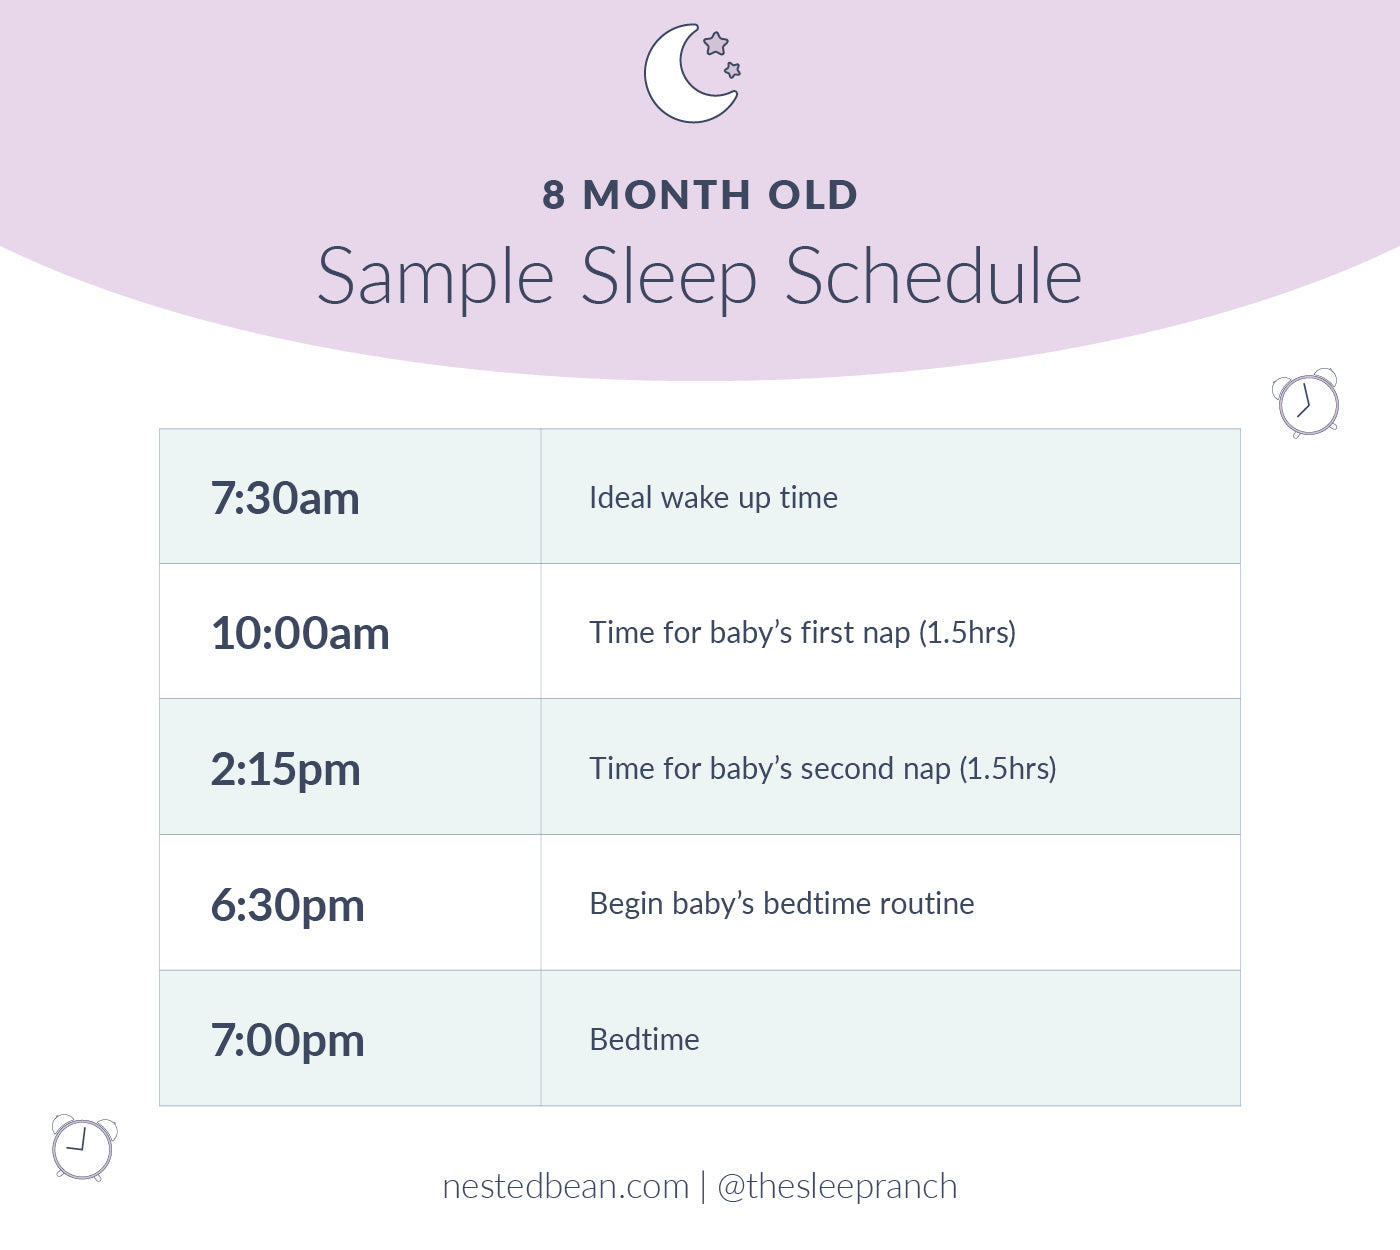 8 month old schedule infographic